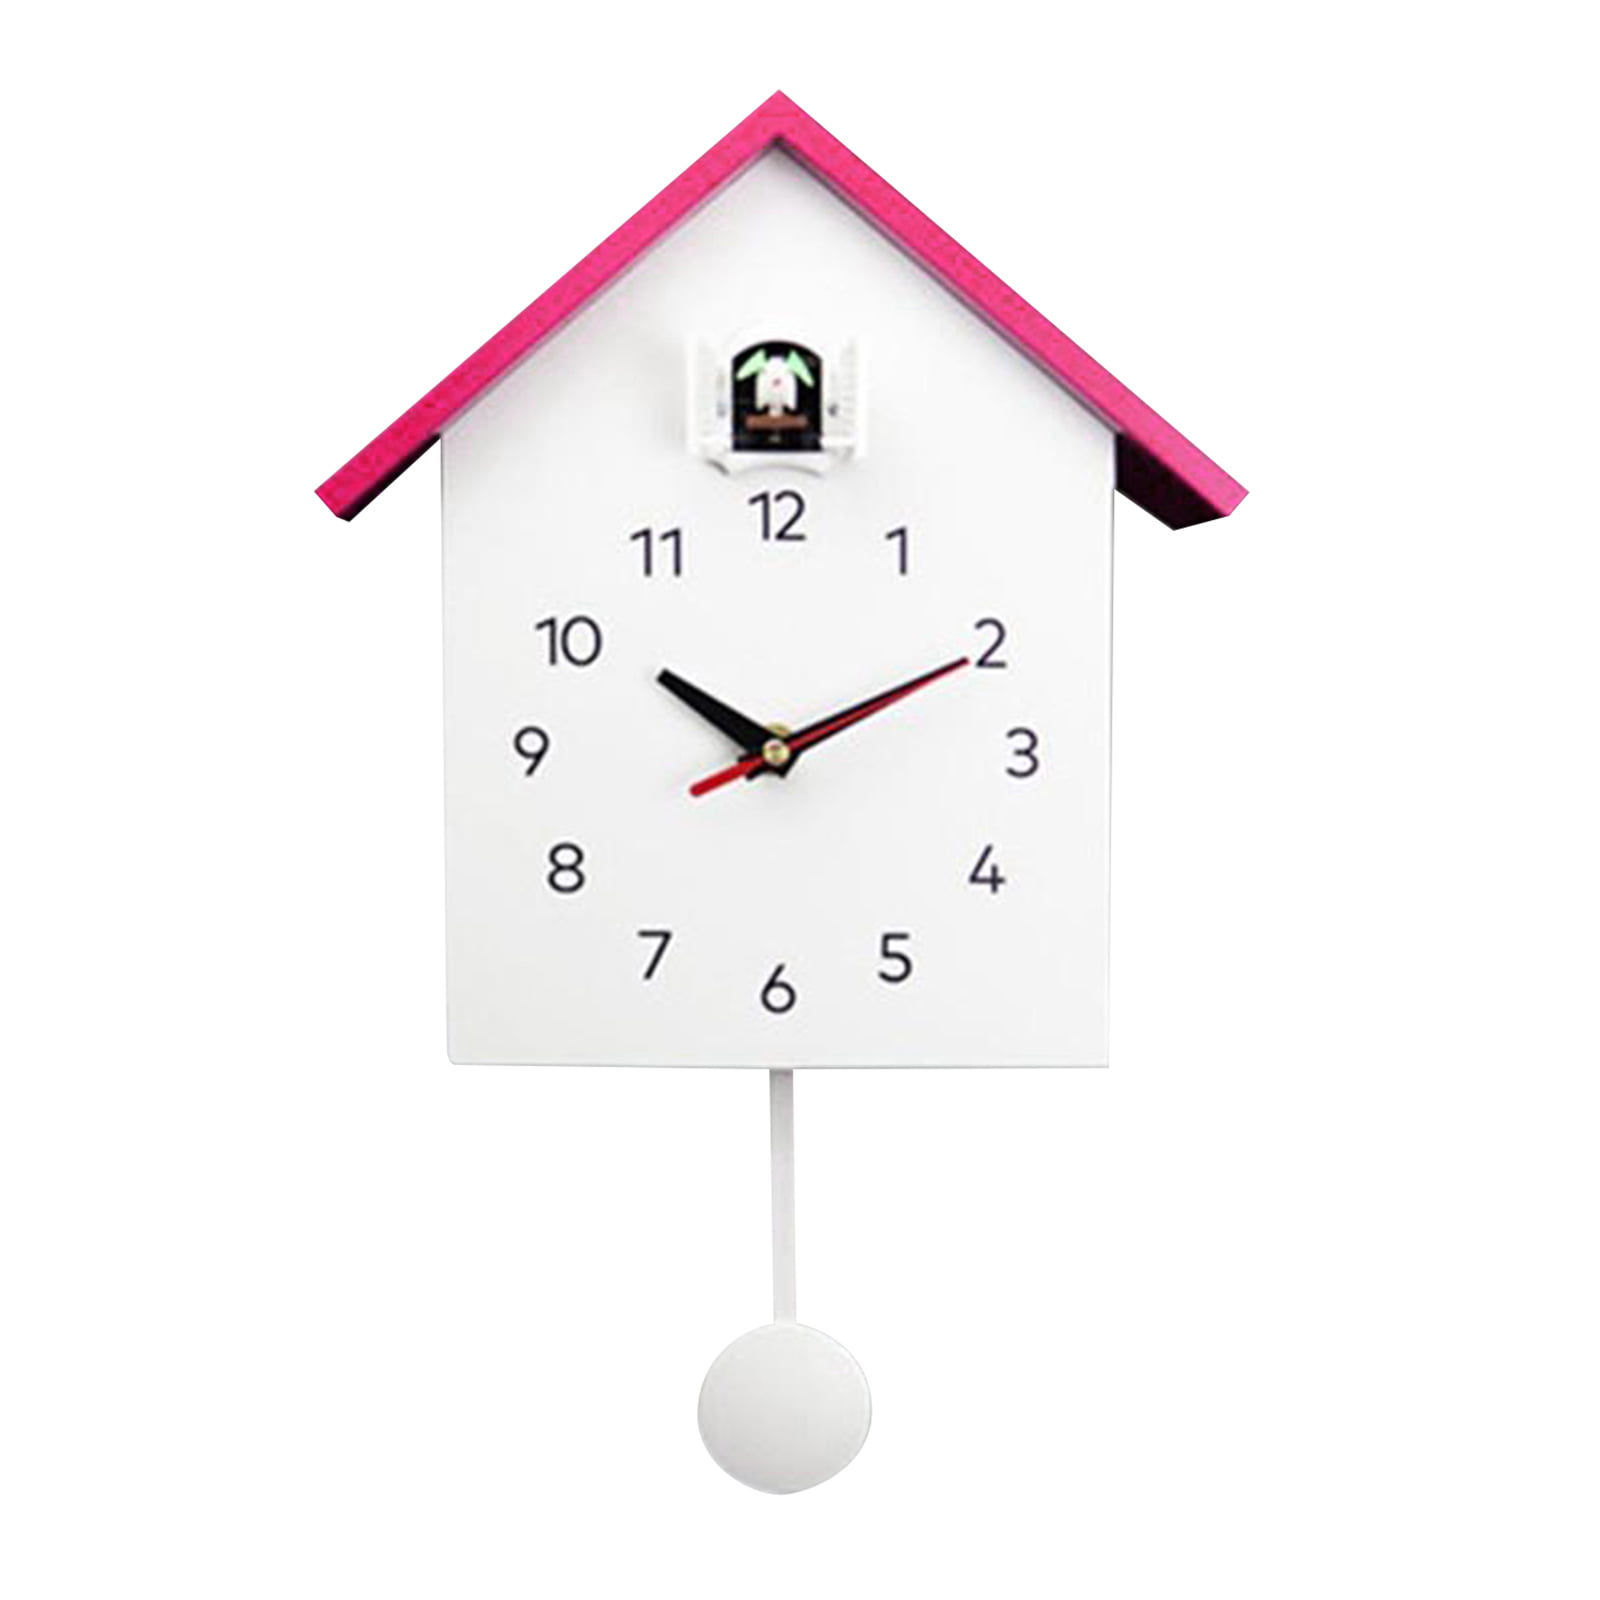 Cuckoo Clock Hands 7/8 Center Hole Minute Hand White Color 